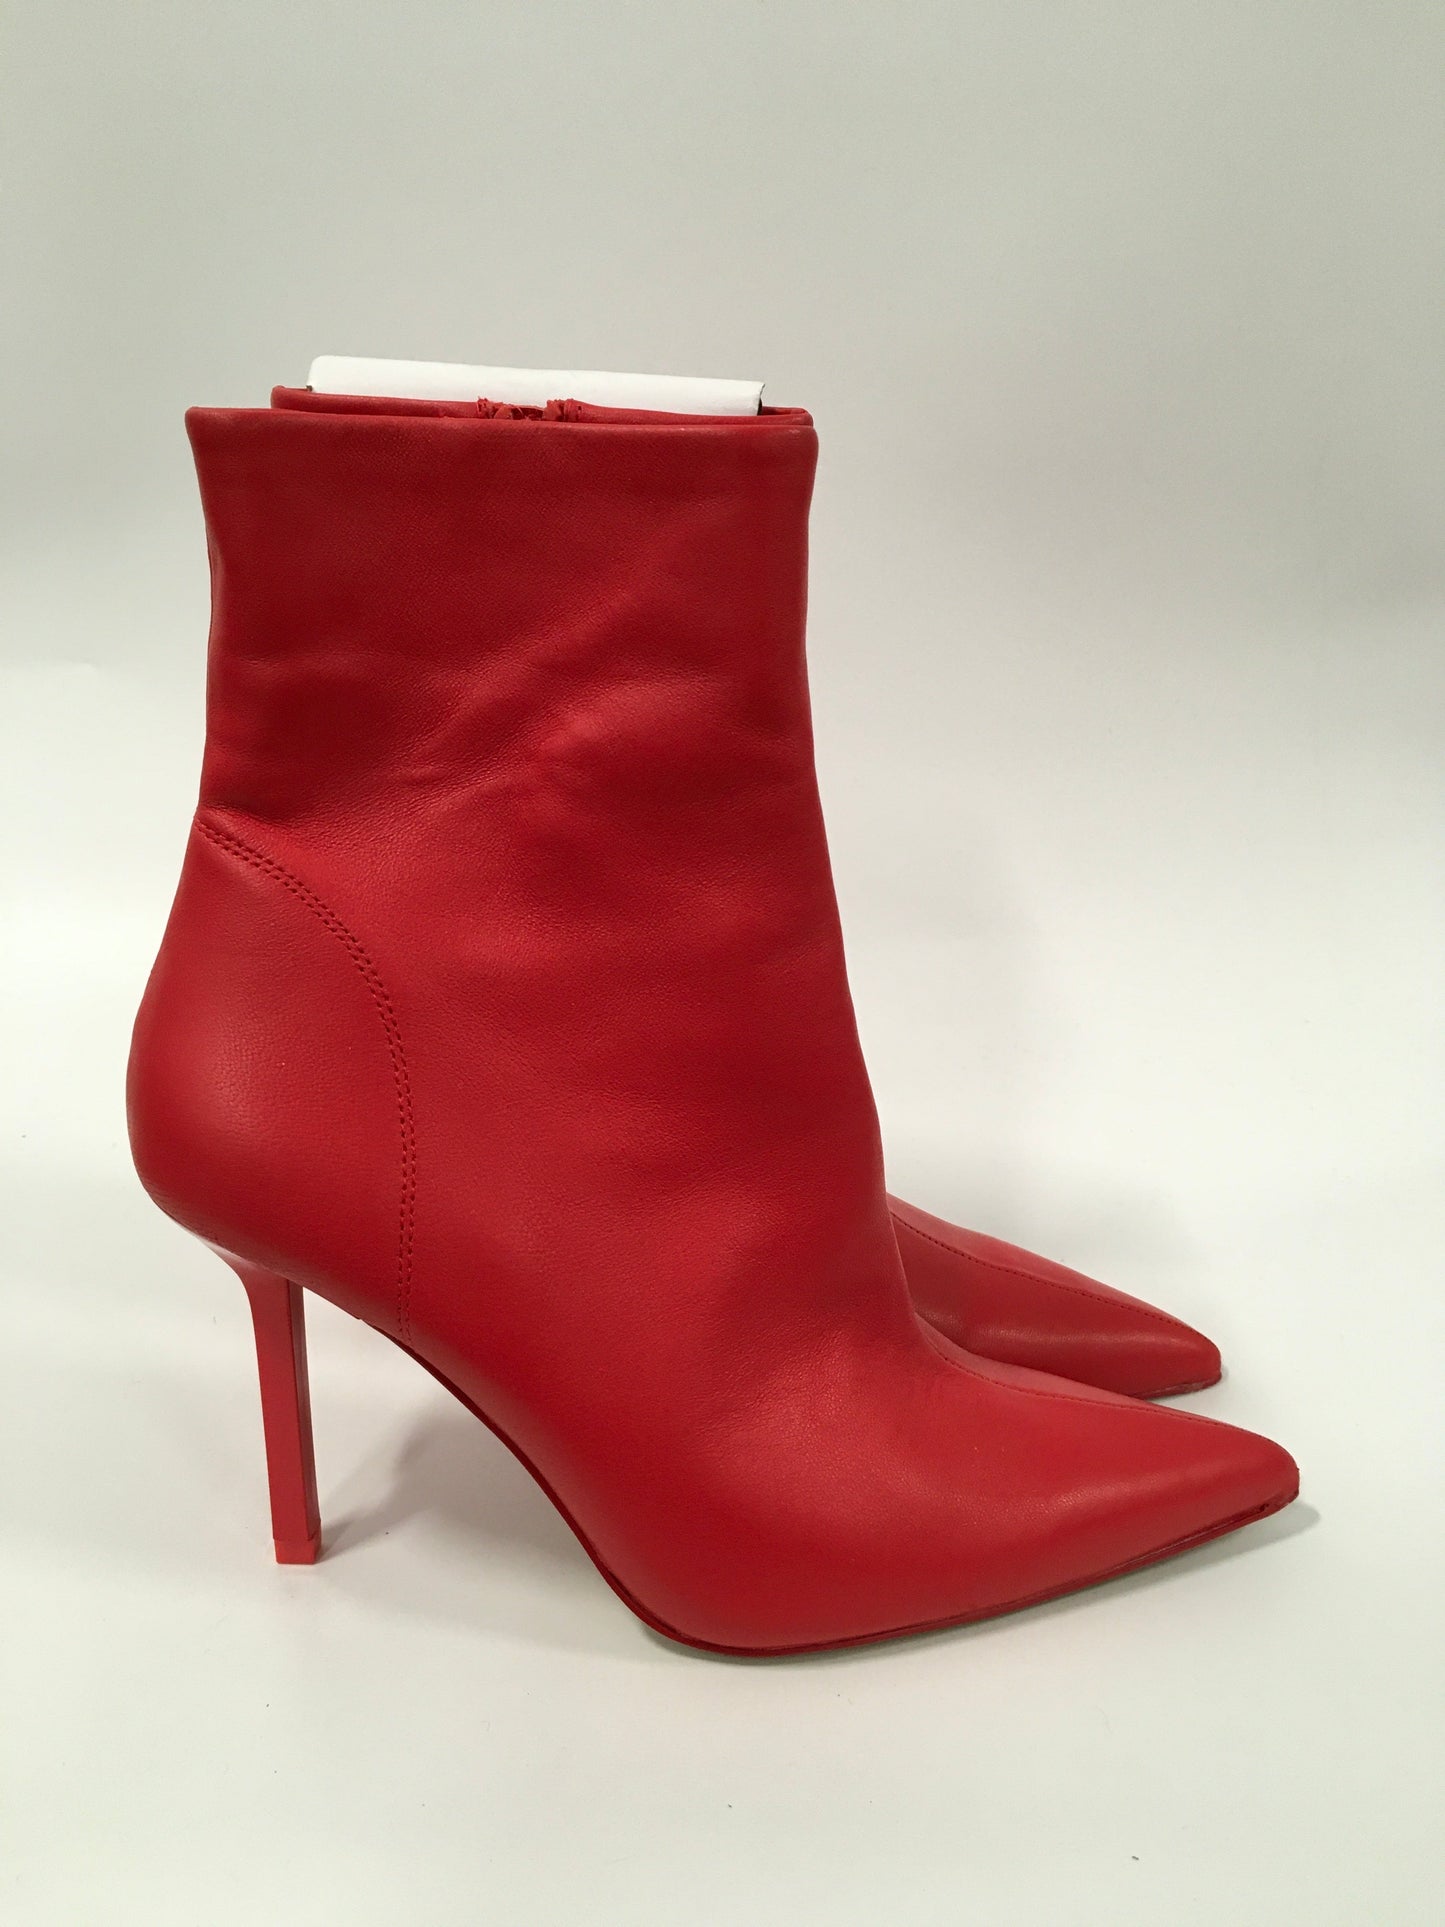 Red Boots Ankle Heels Steve Madden, Size 9.5